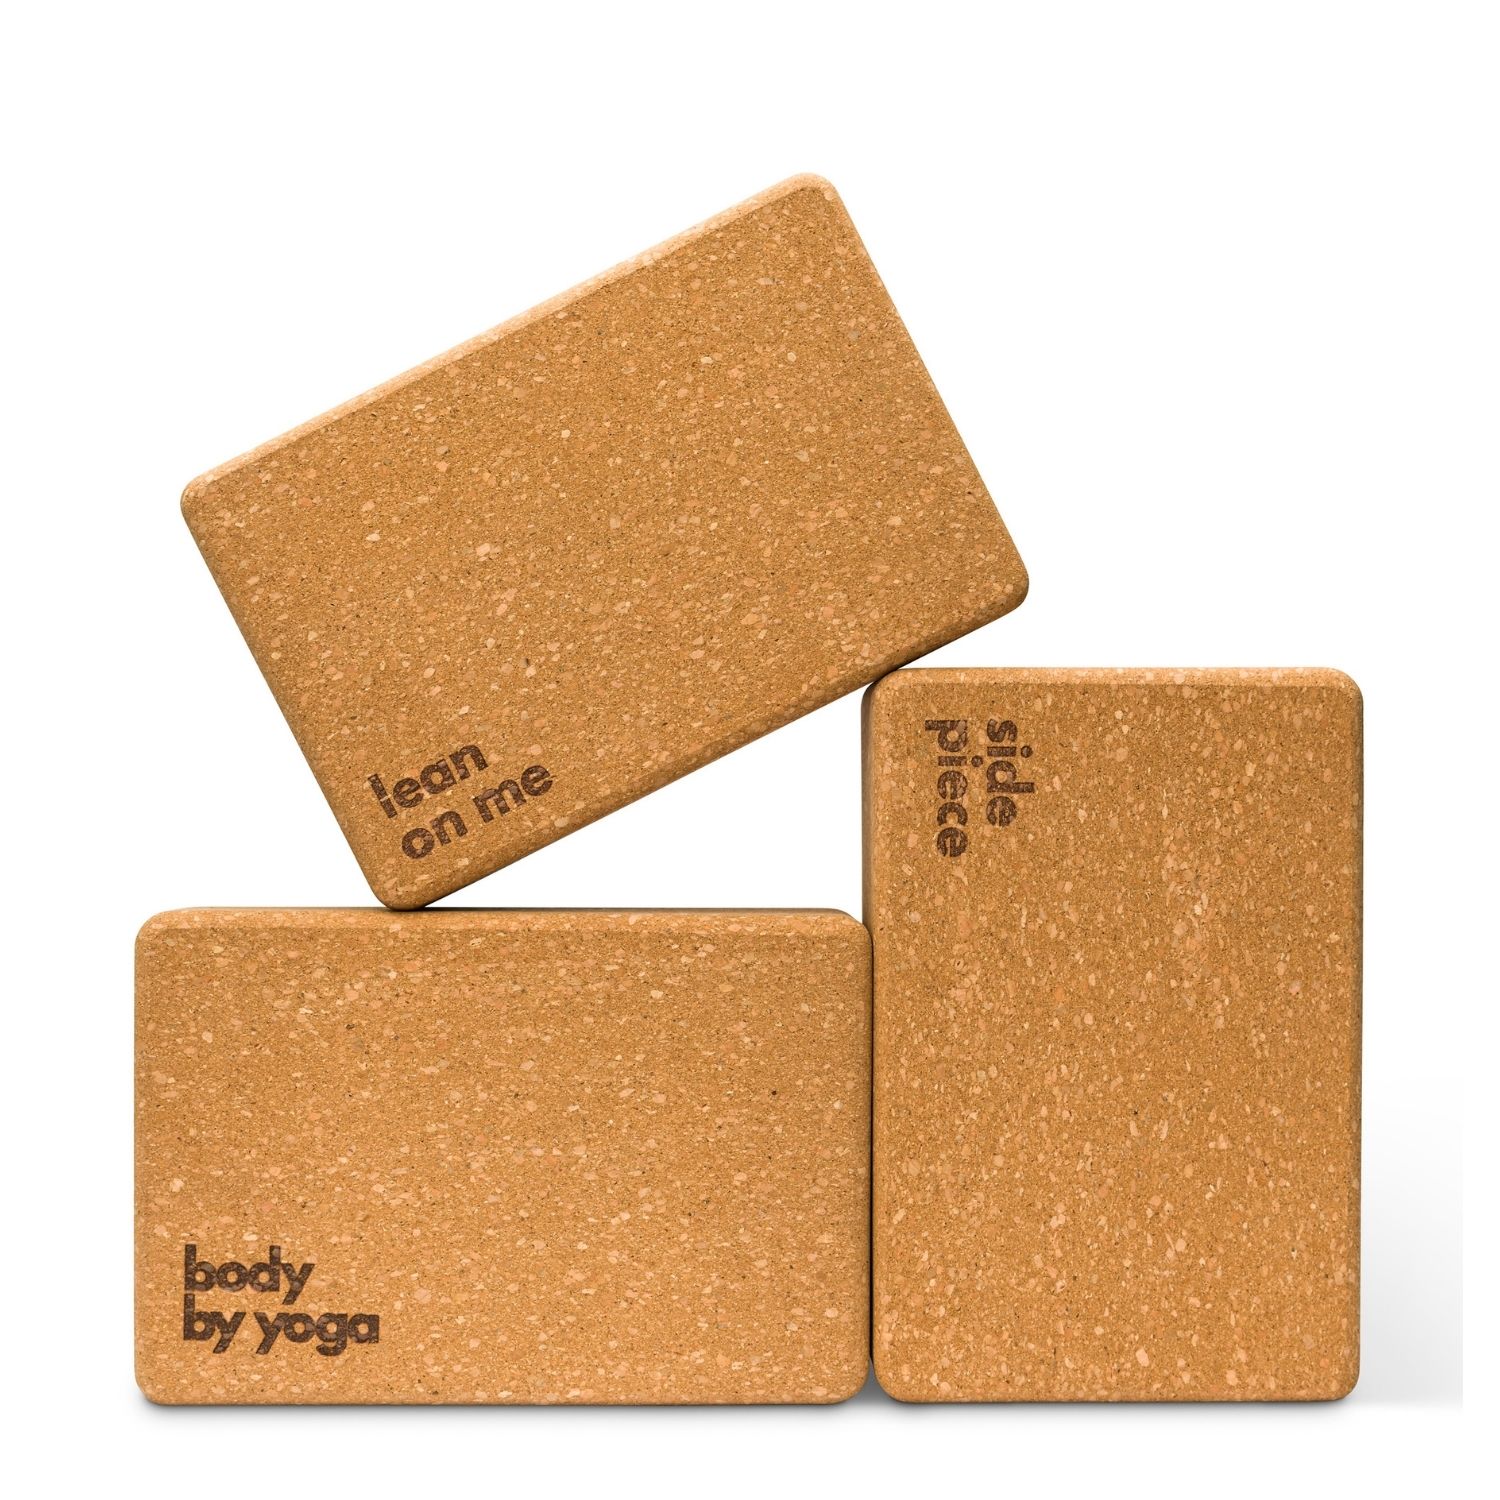 Cork Yoga Block - Physique Fitness Stores